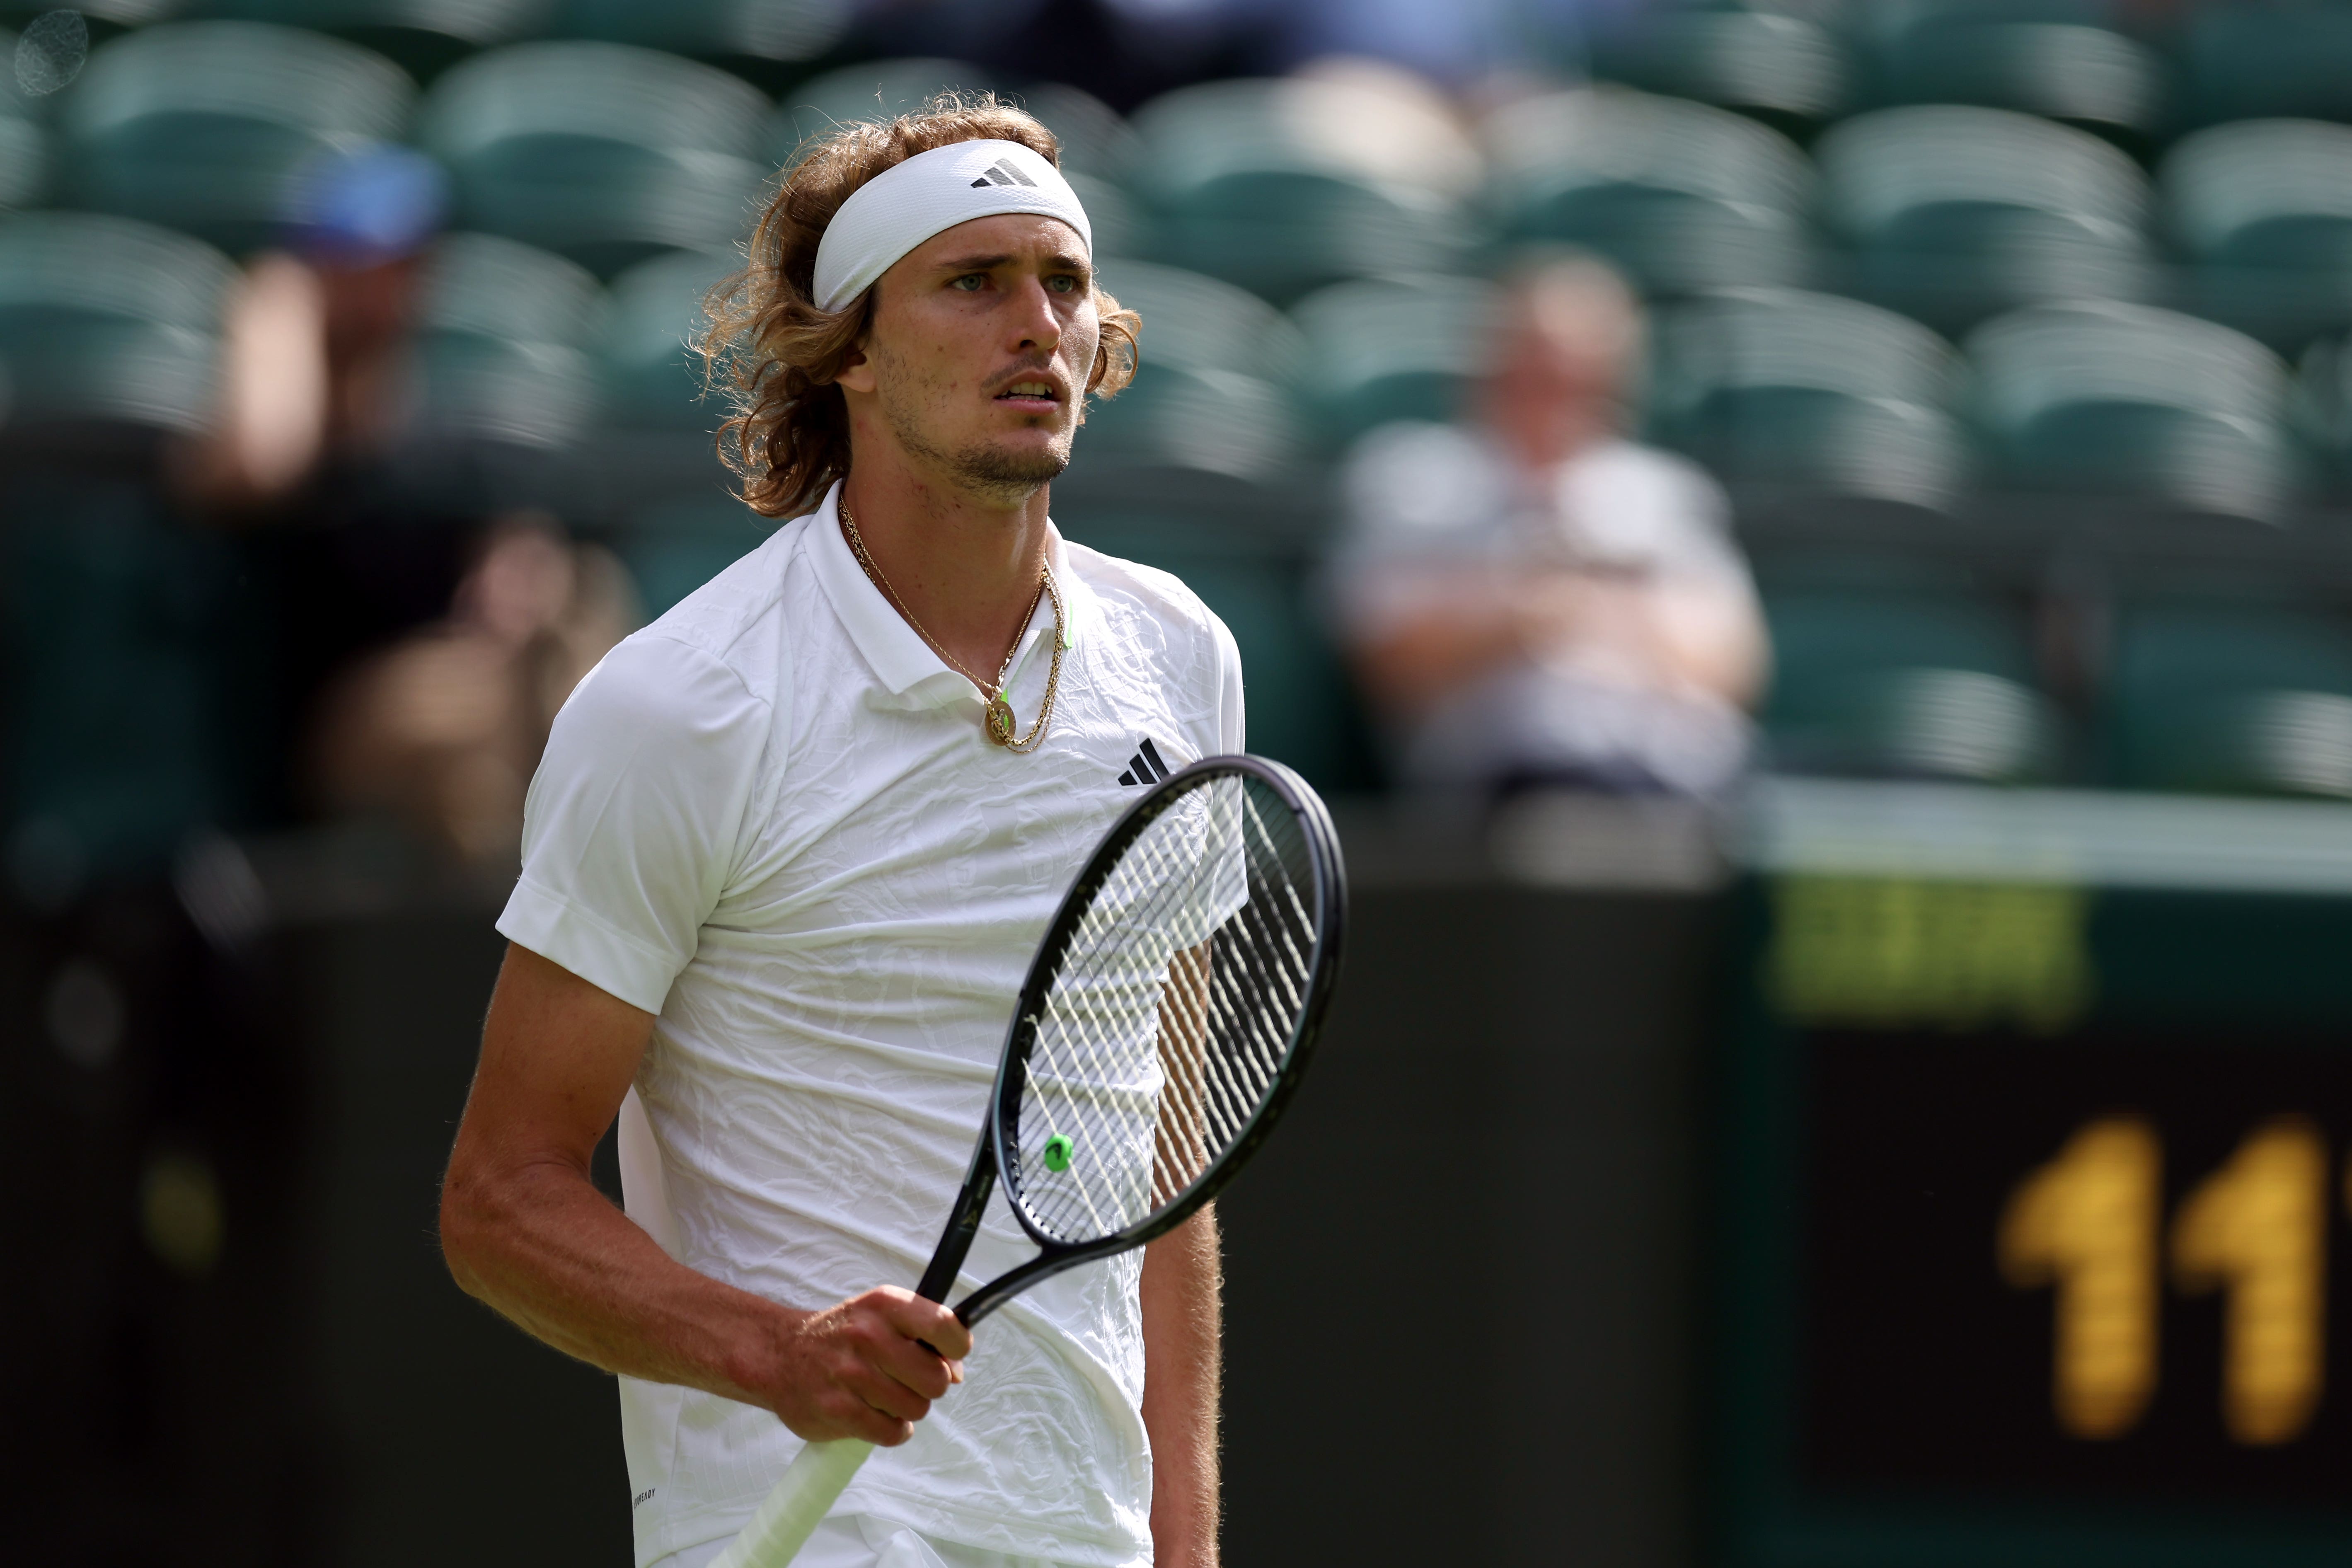 Alexander Zverev makes up for lost time by easing through Wimbledon opener The Independent